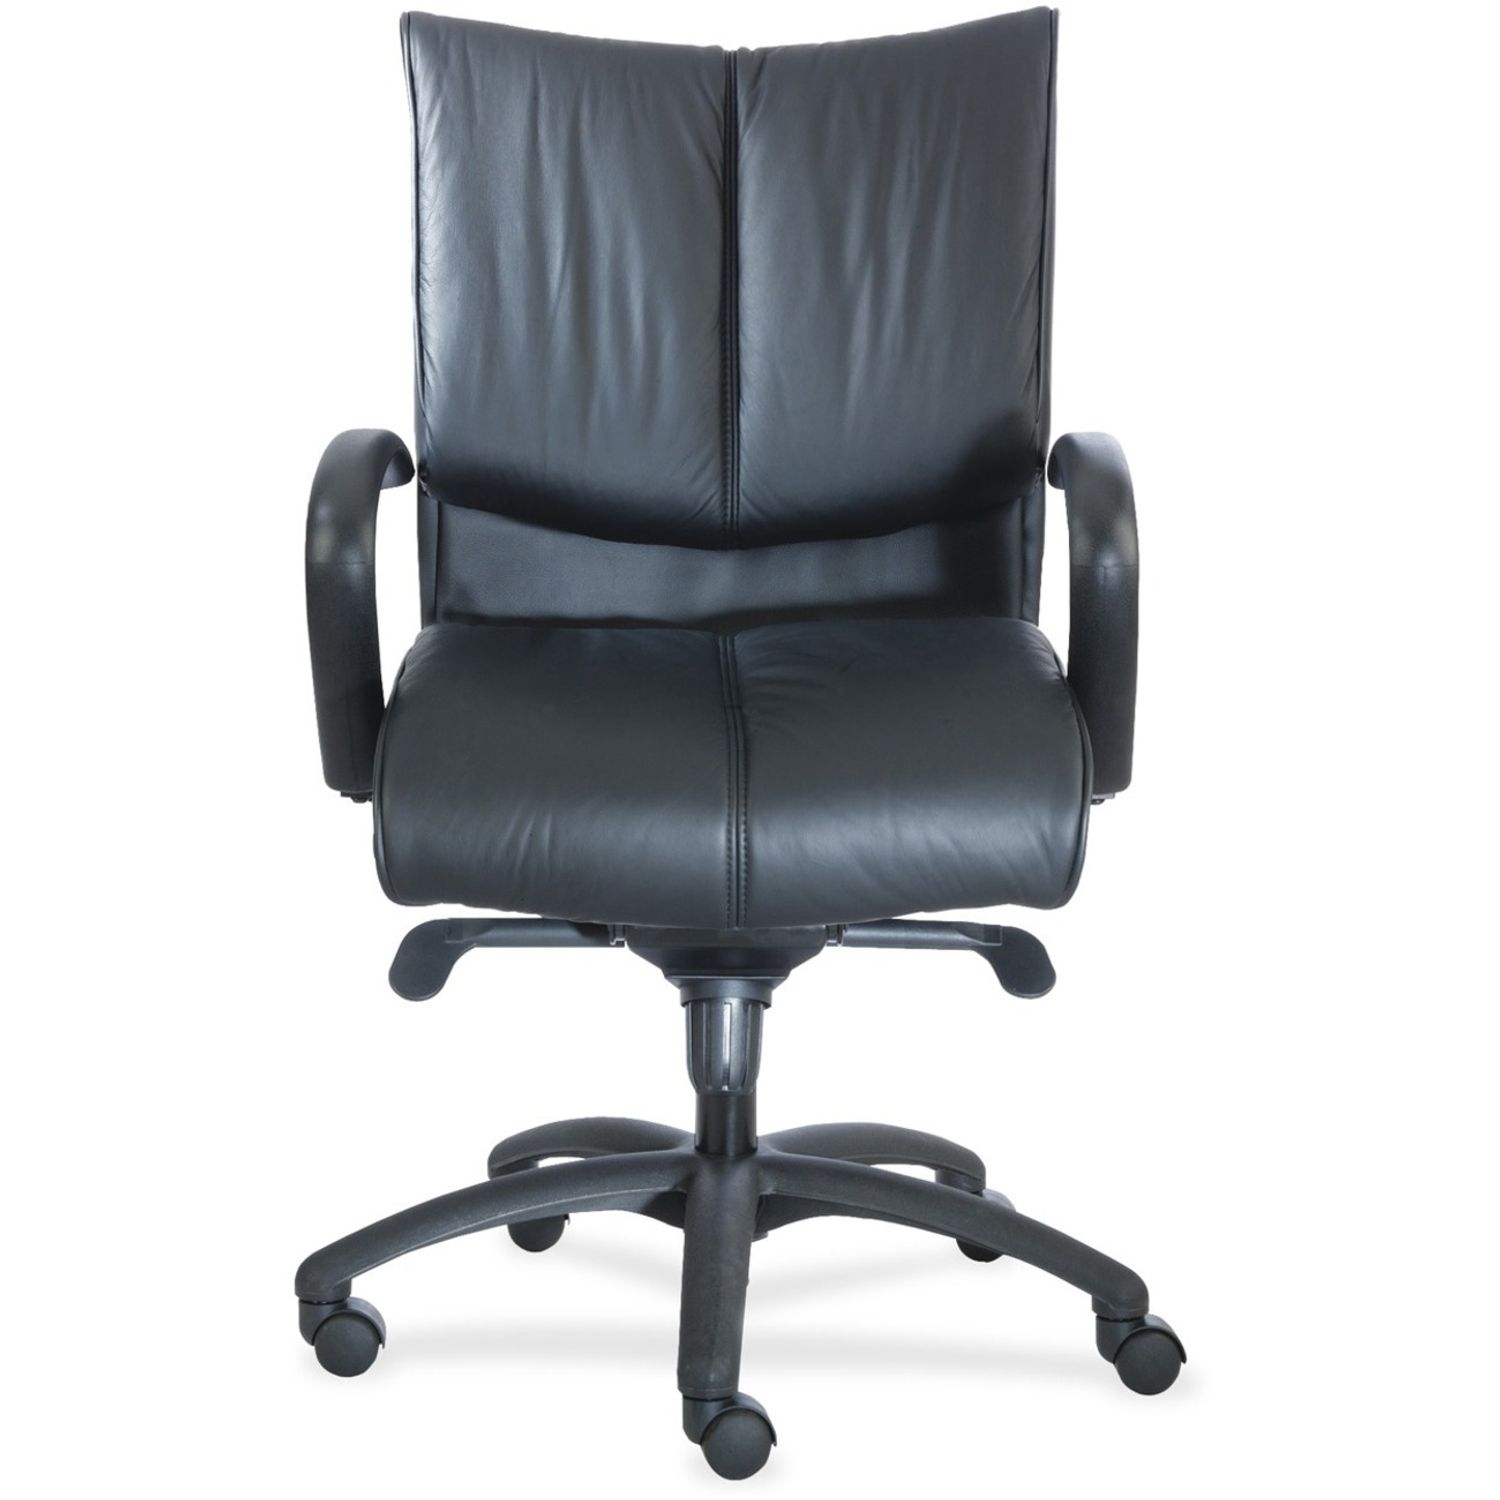 Axis 2600 Mid Back Executive Chair with Arms 26" x 24" x 44", Leather Black Seat